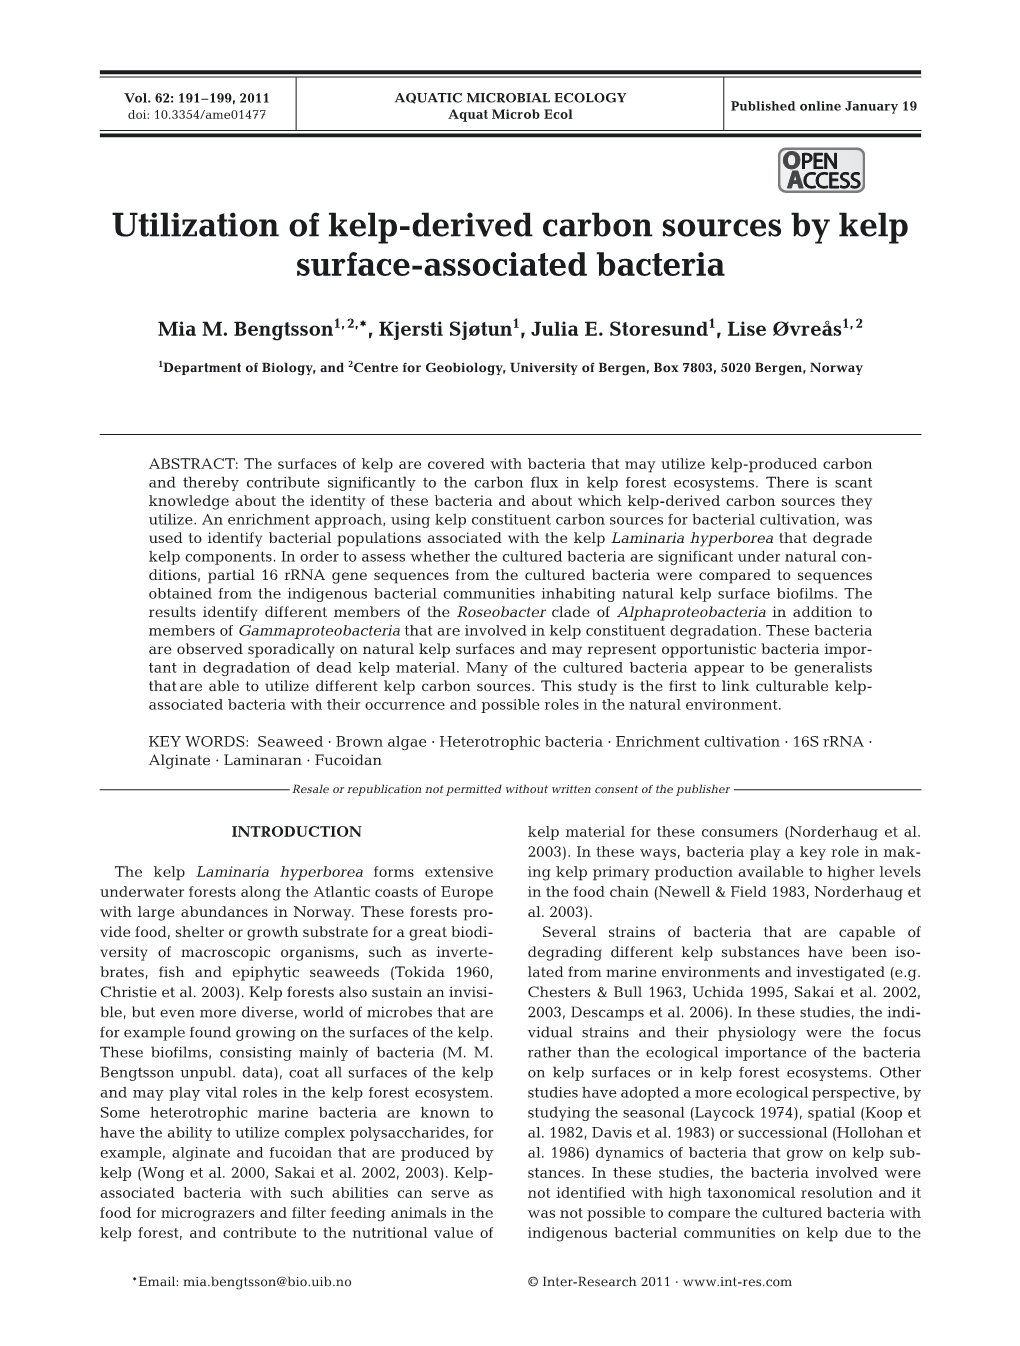 Utilization of Kelp-Derived Carbon Sources by Kelp Surface-Associated Bacteria